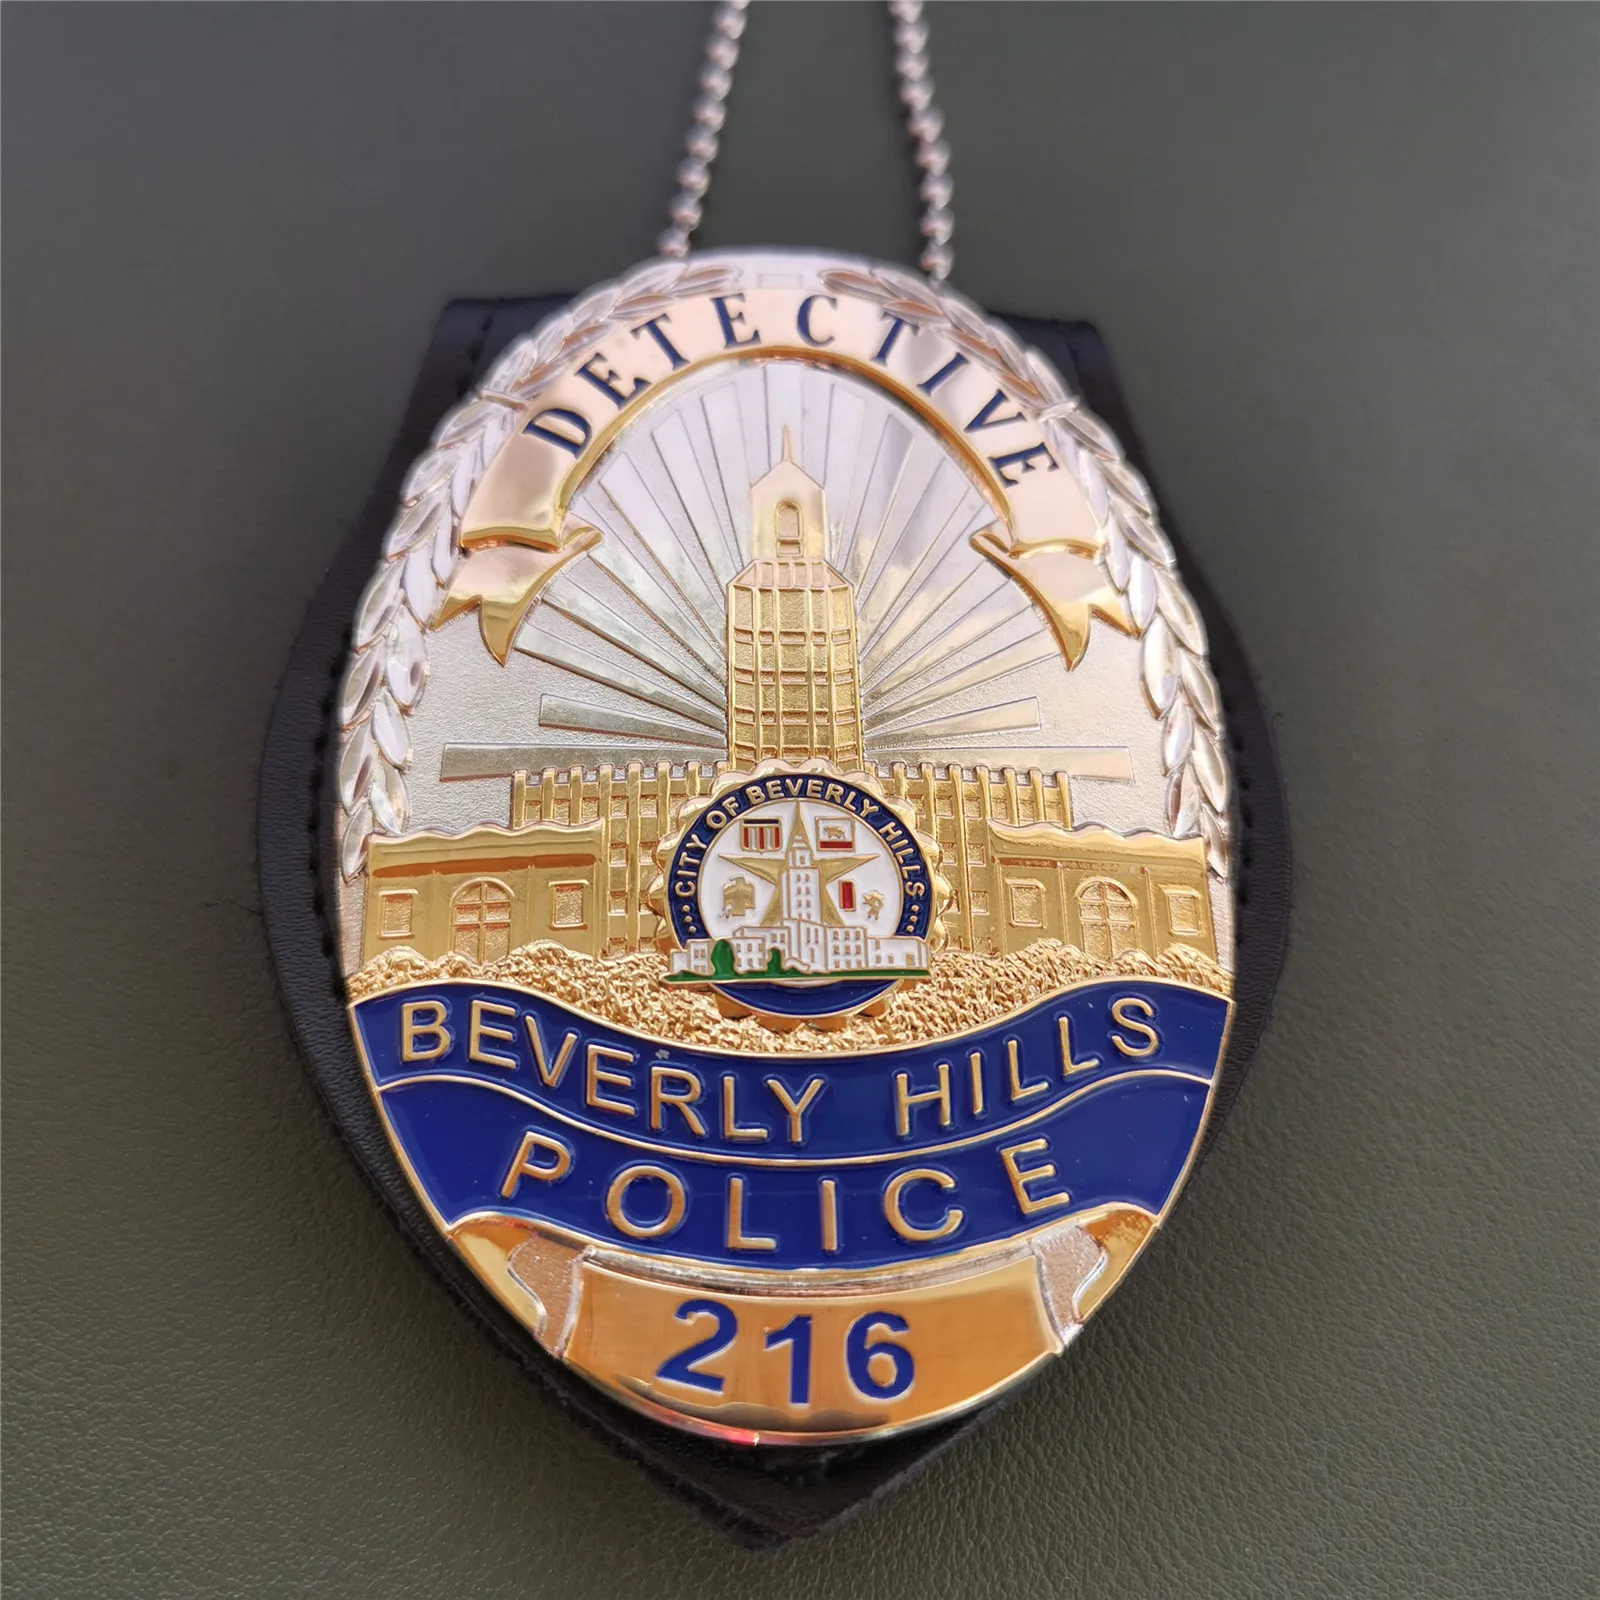 

American Bay/Beverly Hills/BeverlyHills Detective/ Badge No. 216 and accessories film and television props 1:1